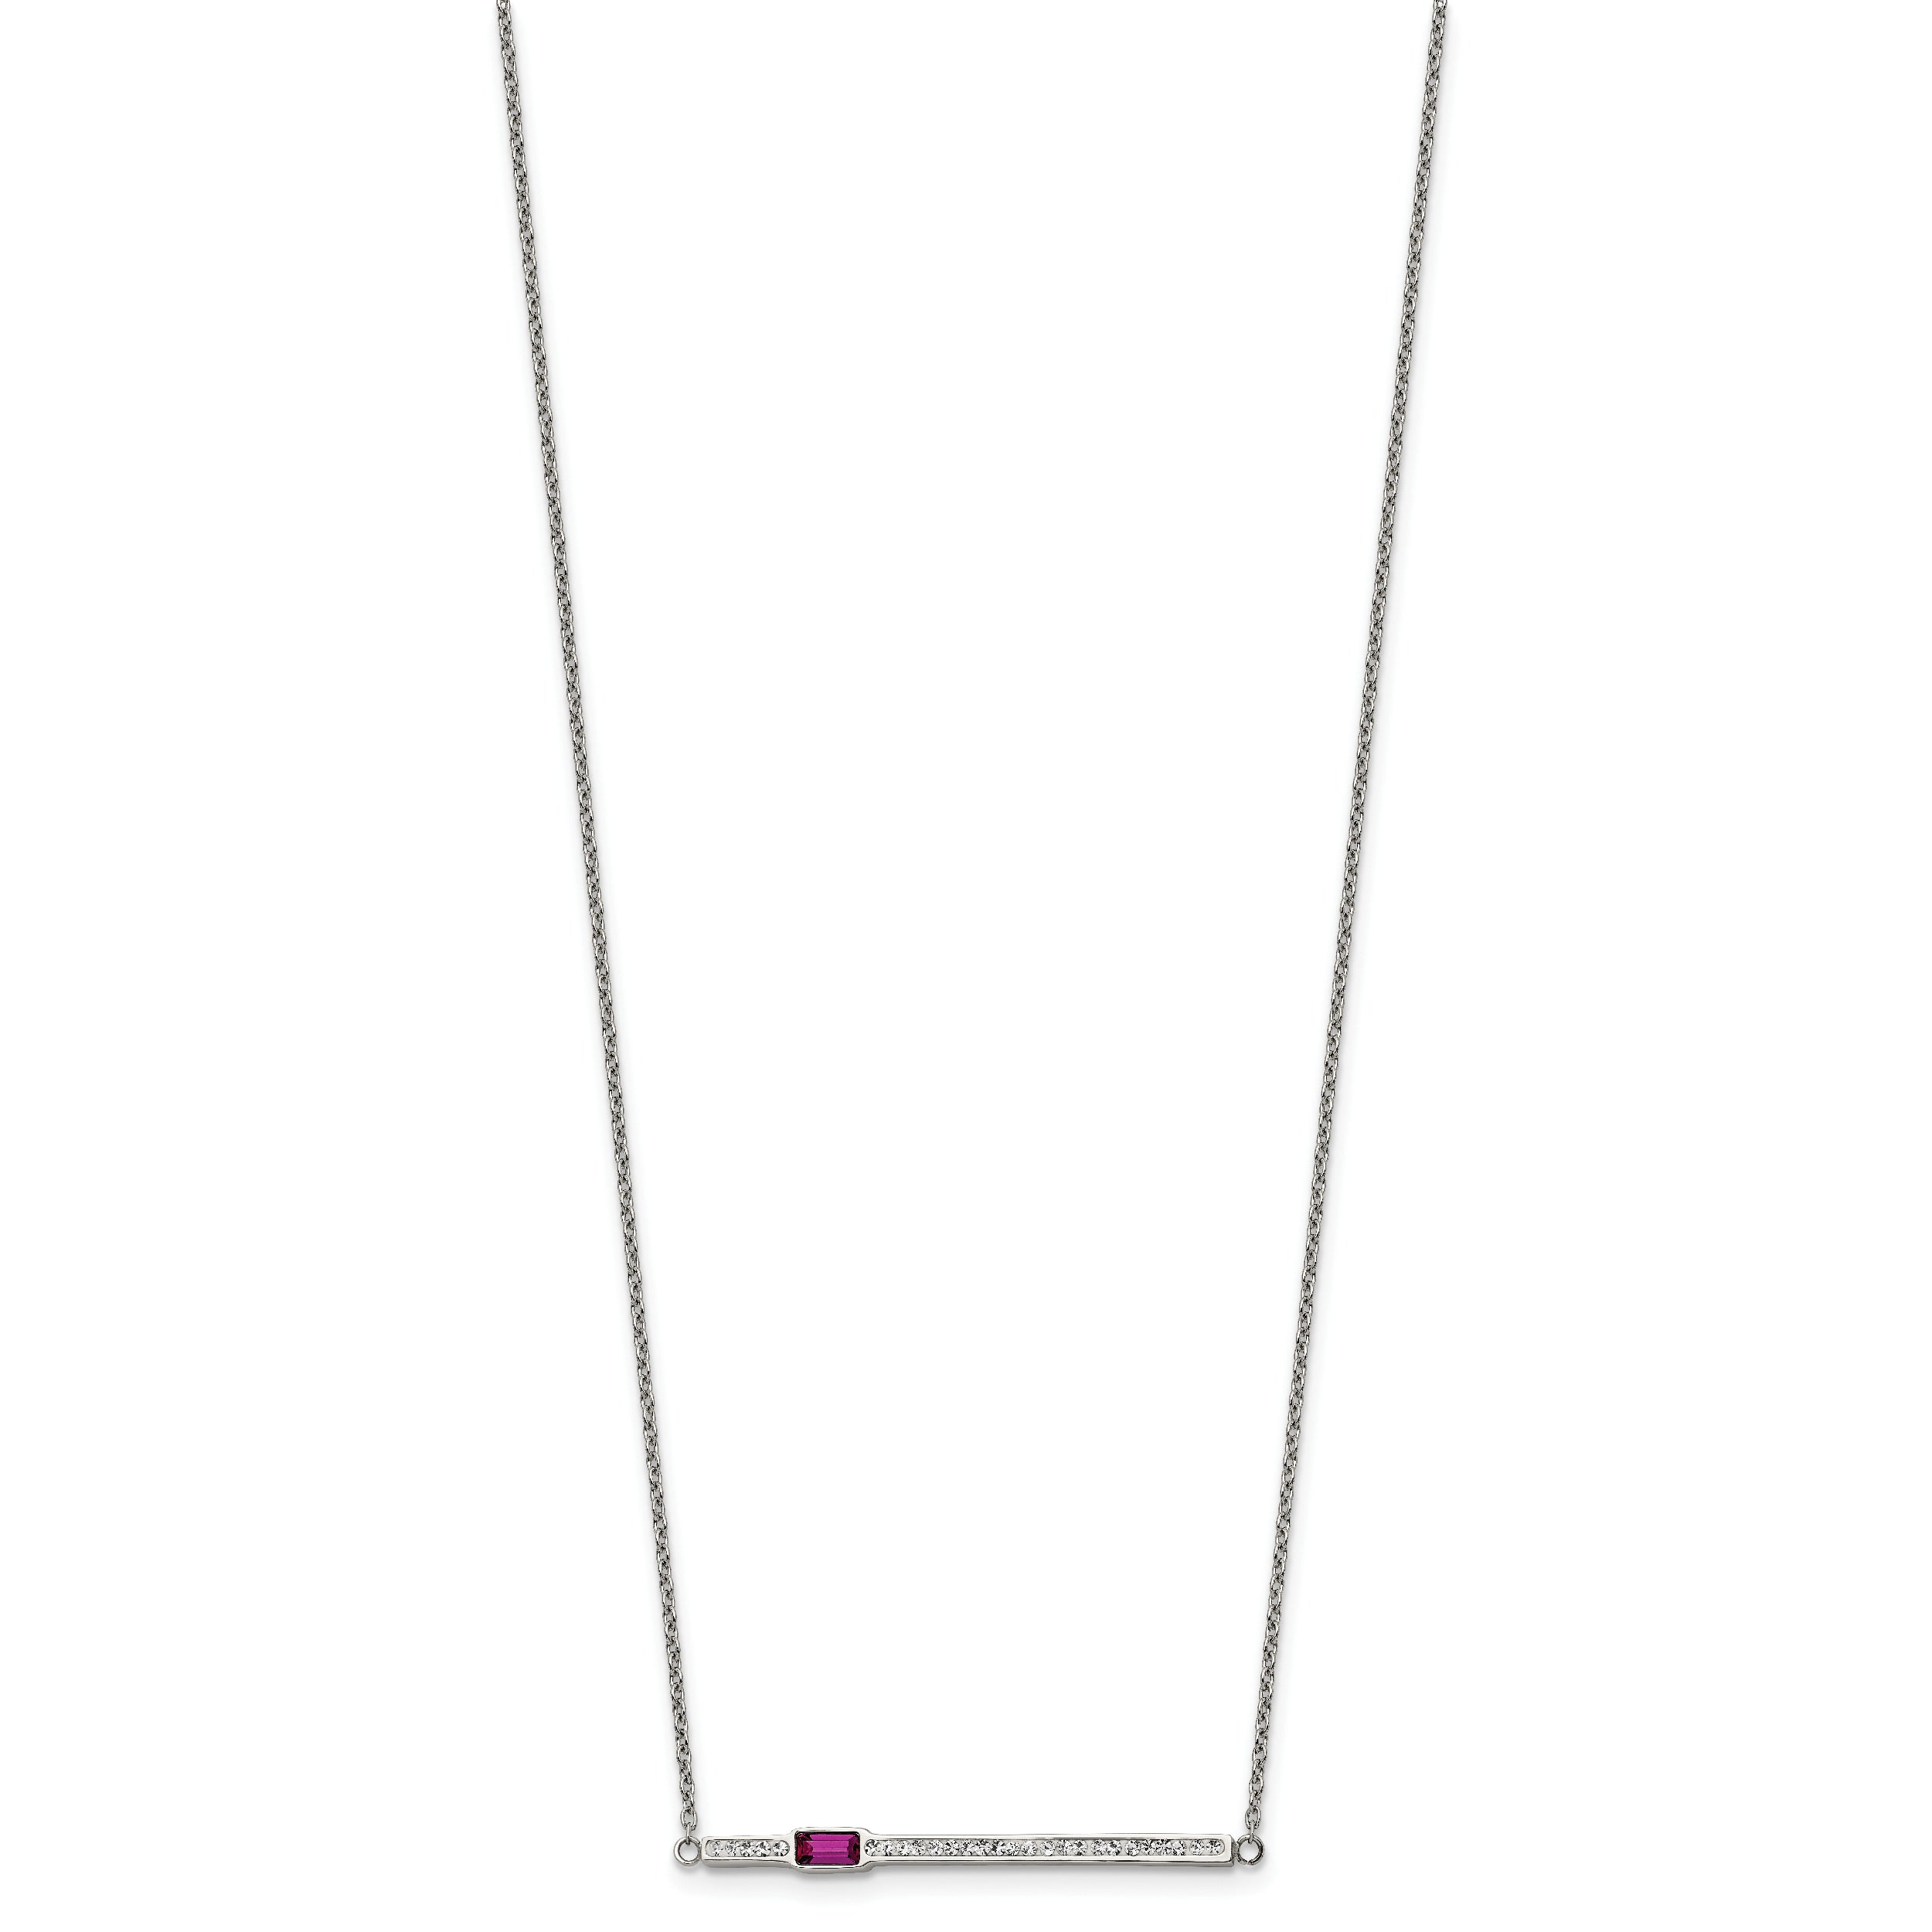 Chisel Stainless Steel Polished Preciosa Crystal and Red Glass Bar on a 15 inch Cable Chain with a 2.75 inch Extension Necklace